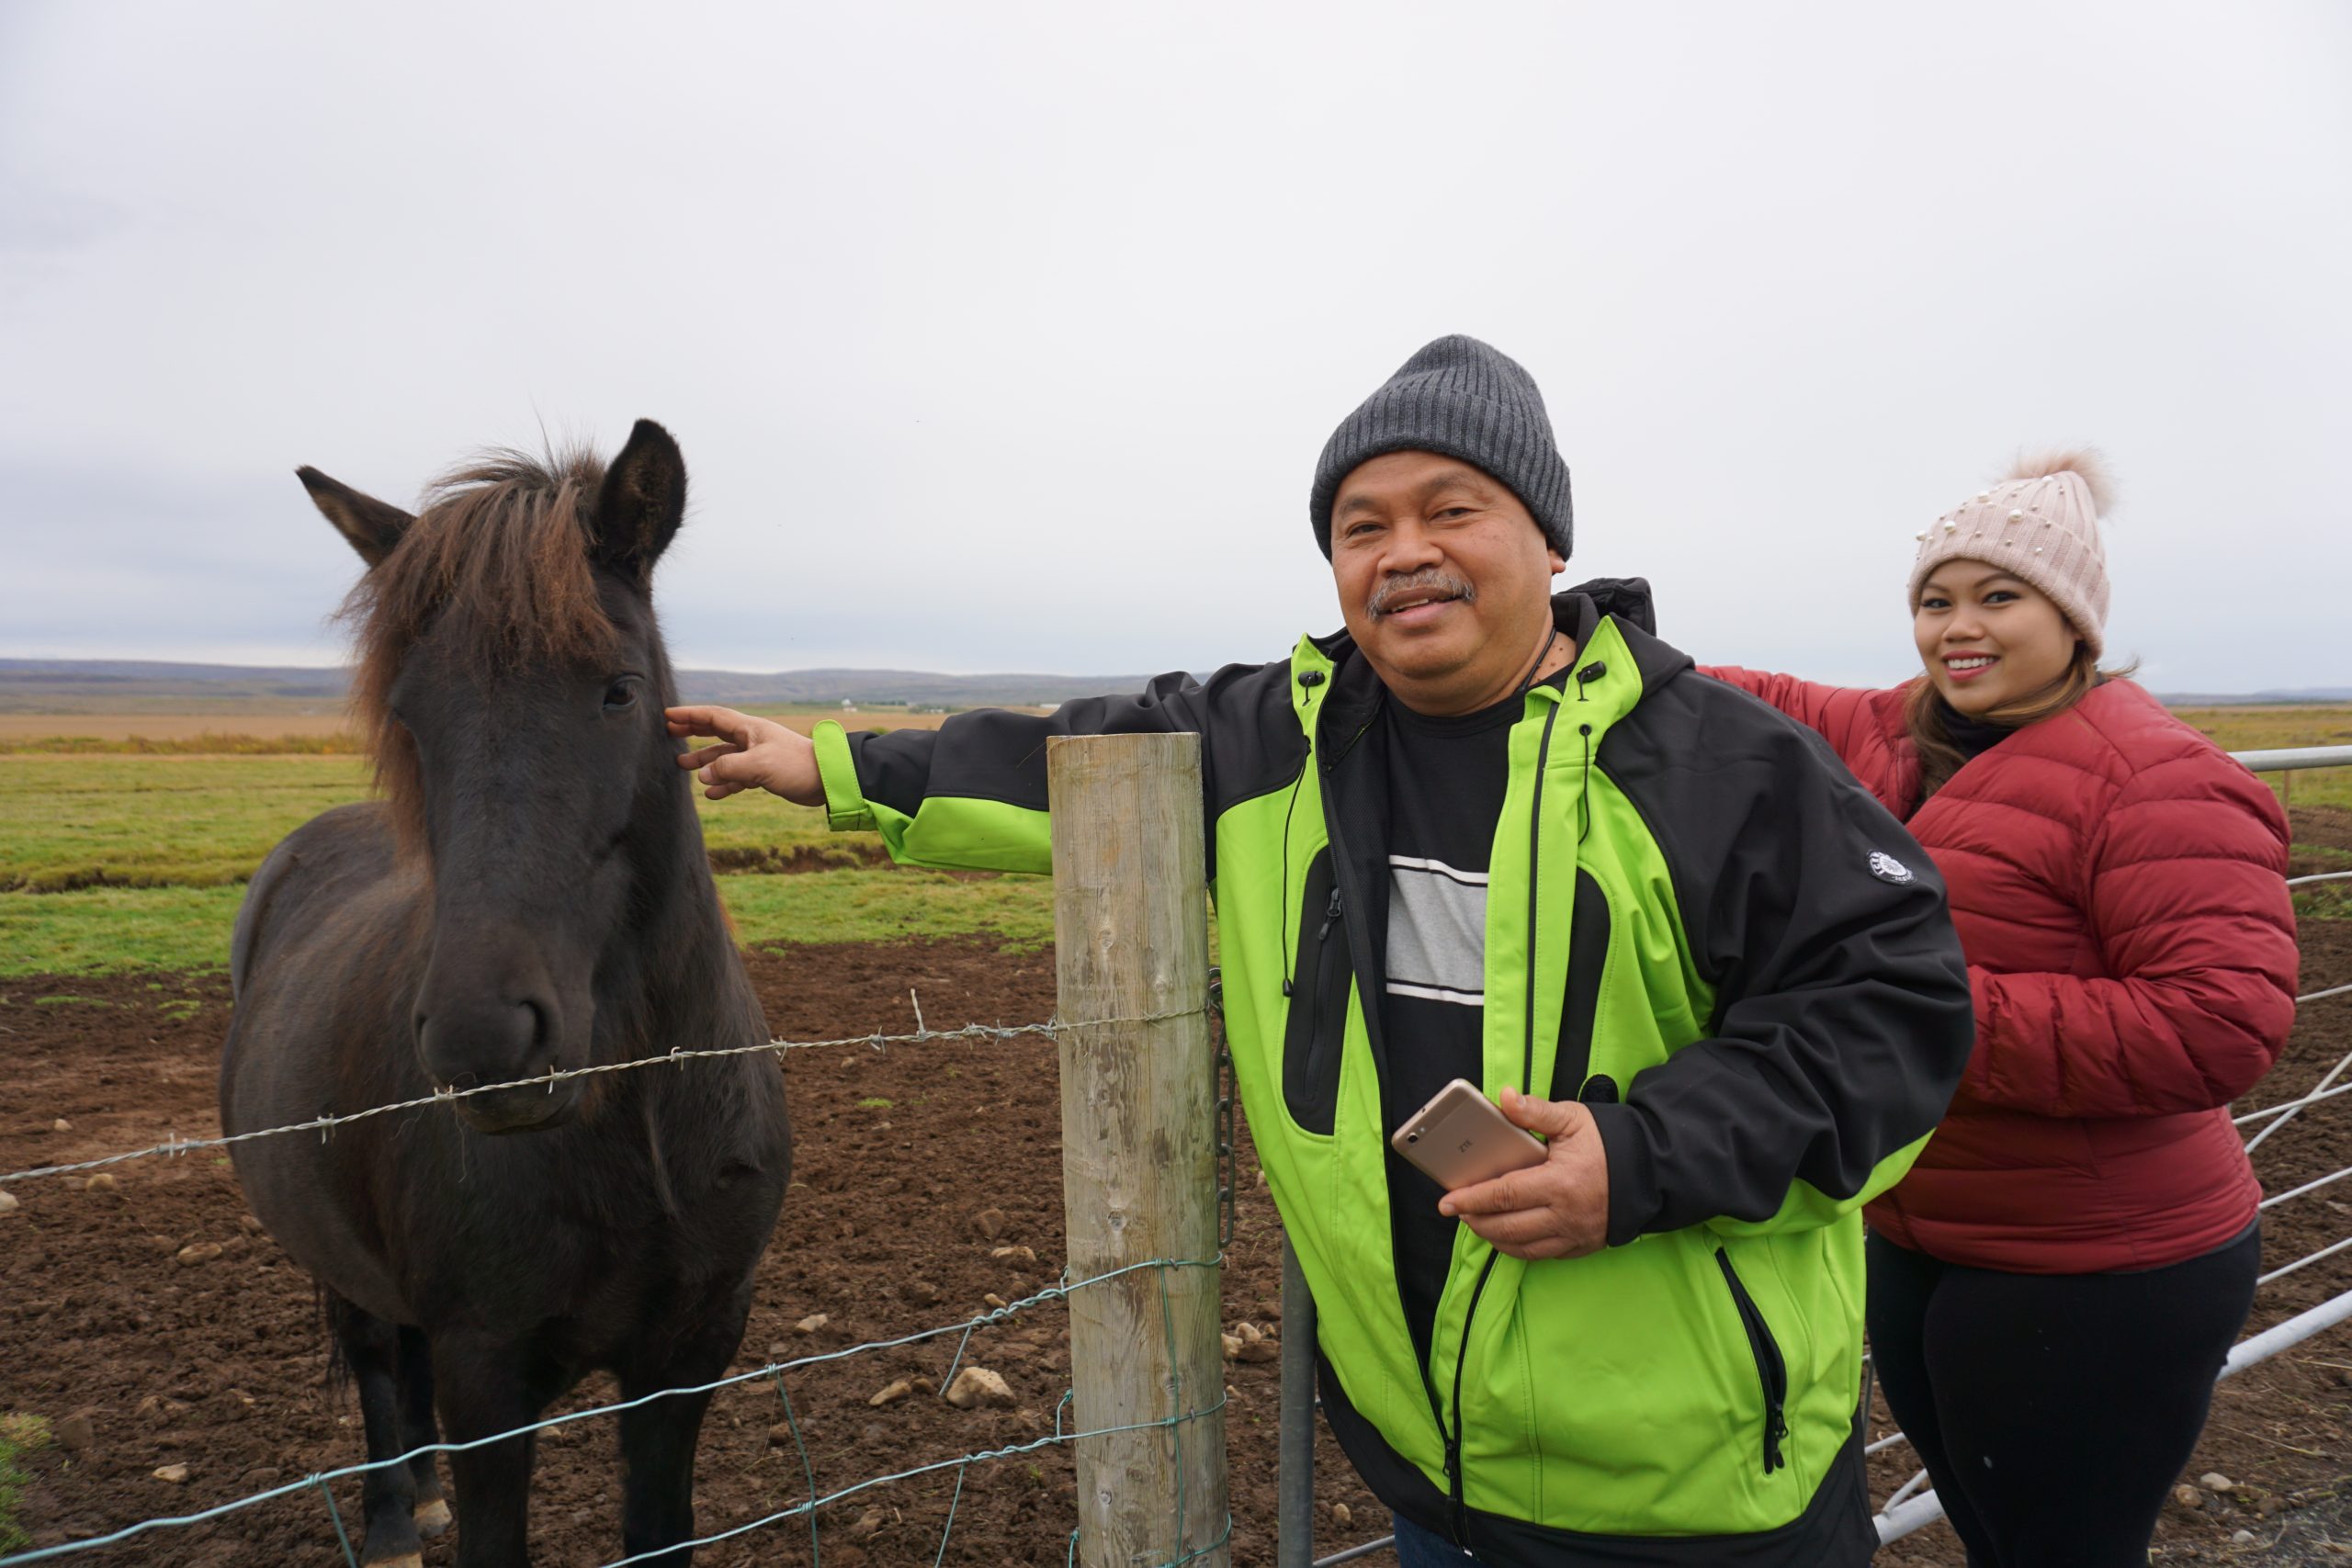 Meeting Icelandic horses along the Golden Circle Route